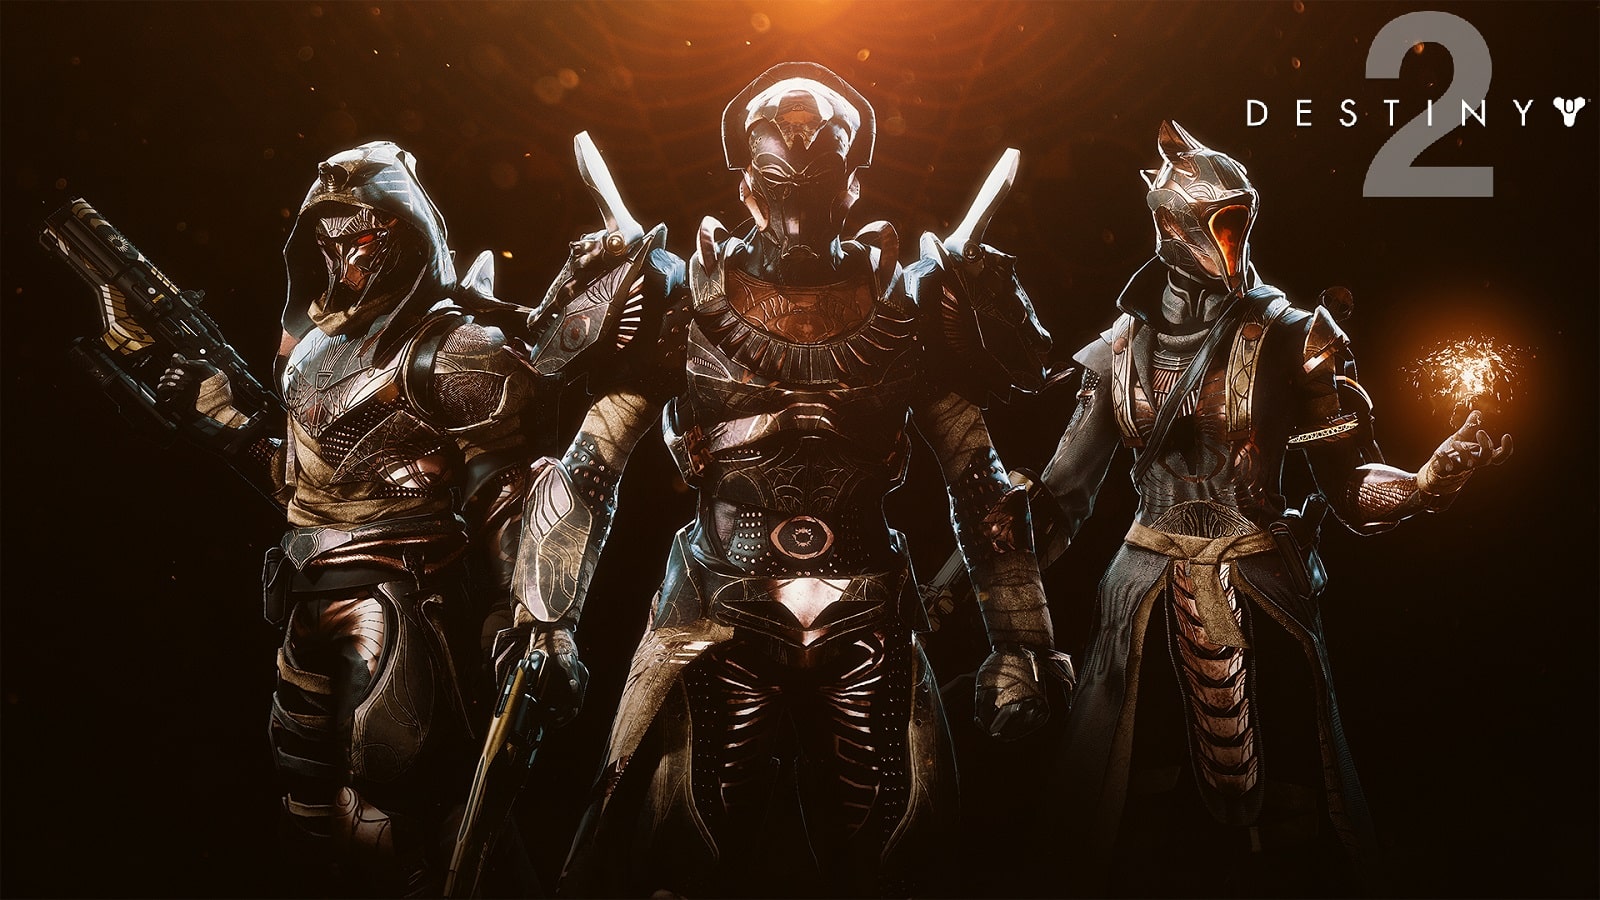 destiny 2 trials of osiris changes! You'll be able to get more loot with less stress